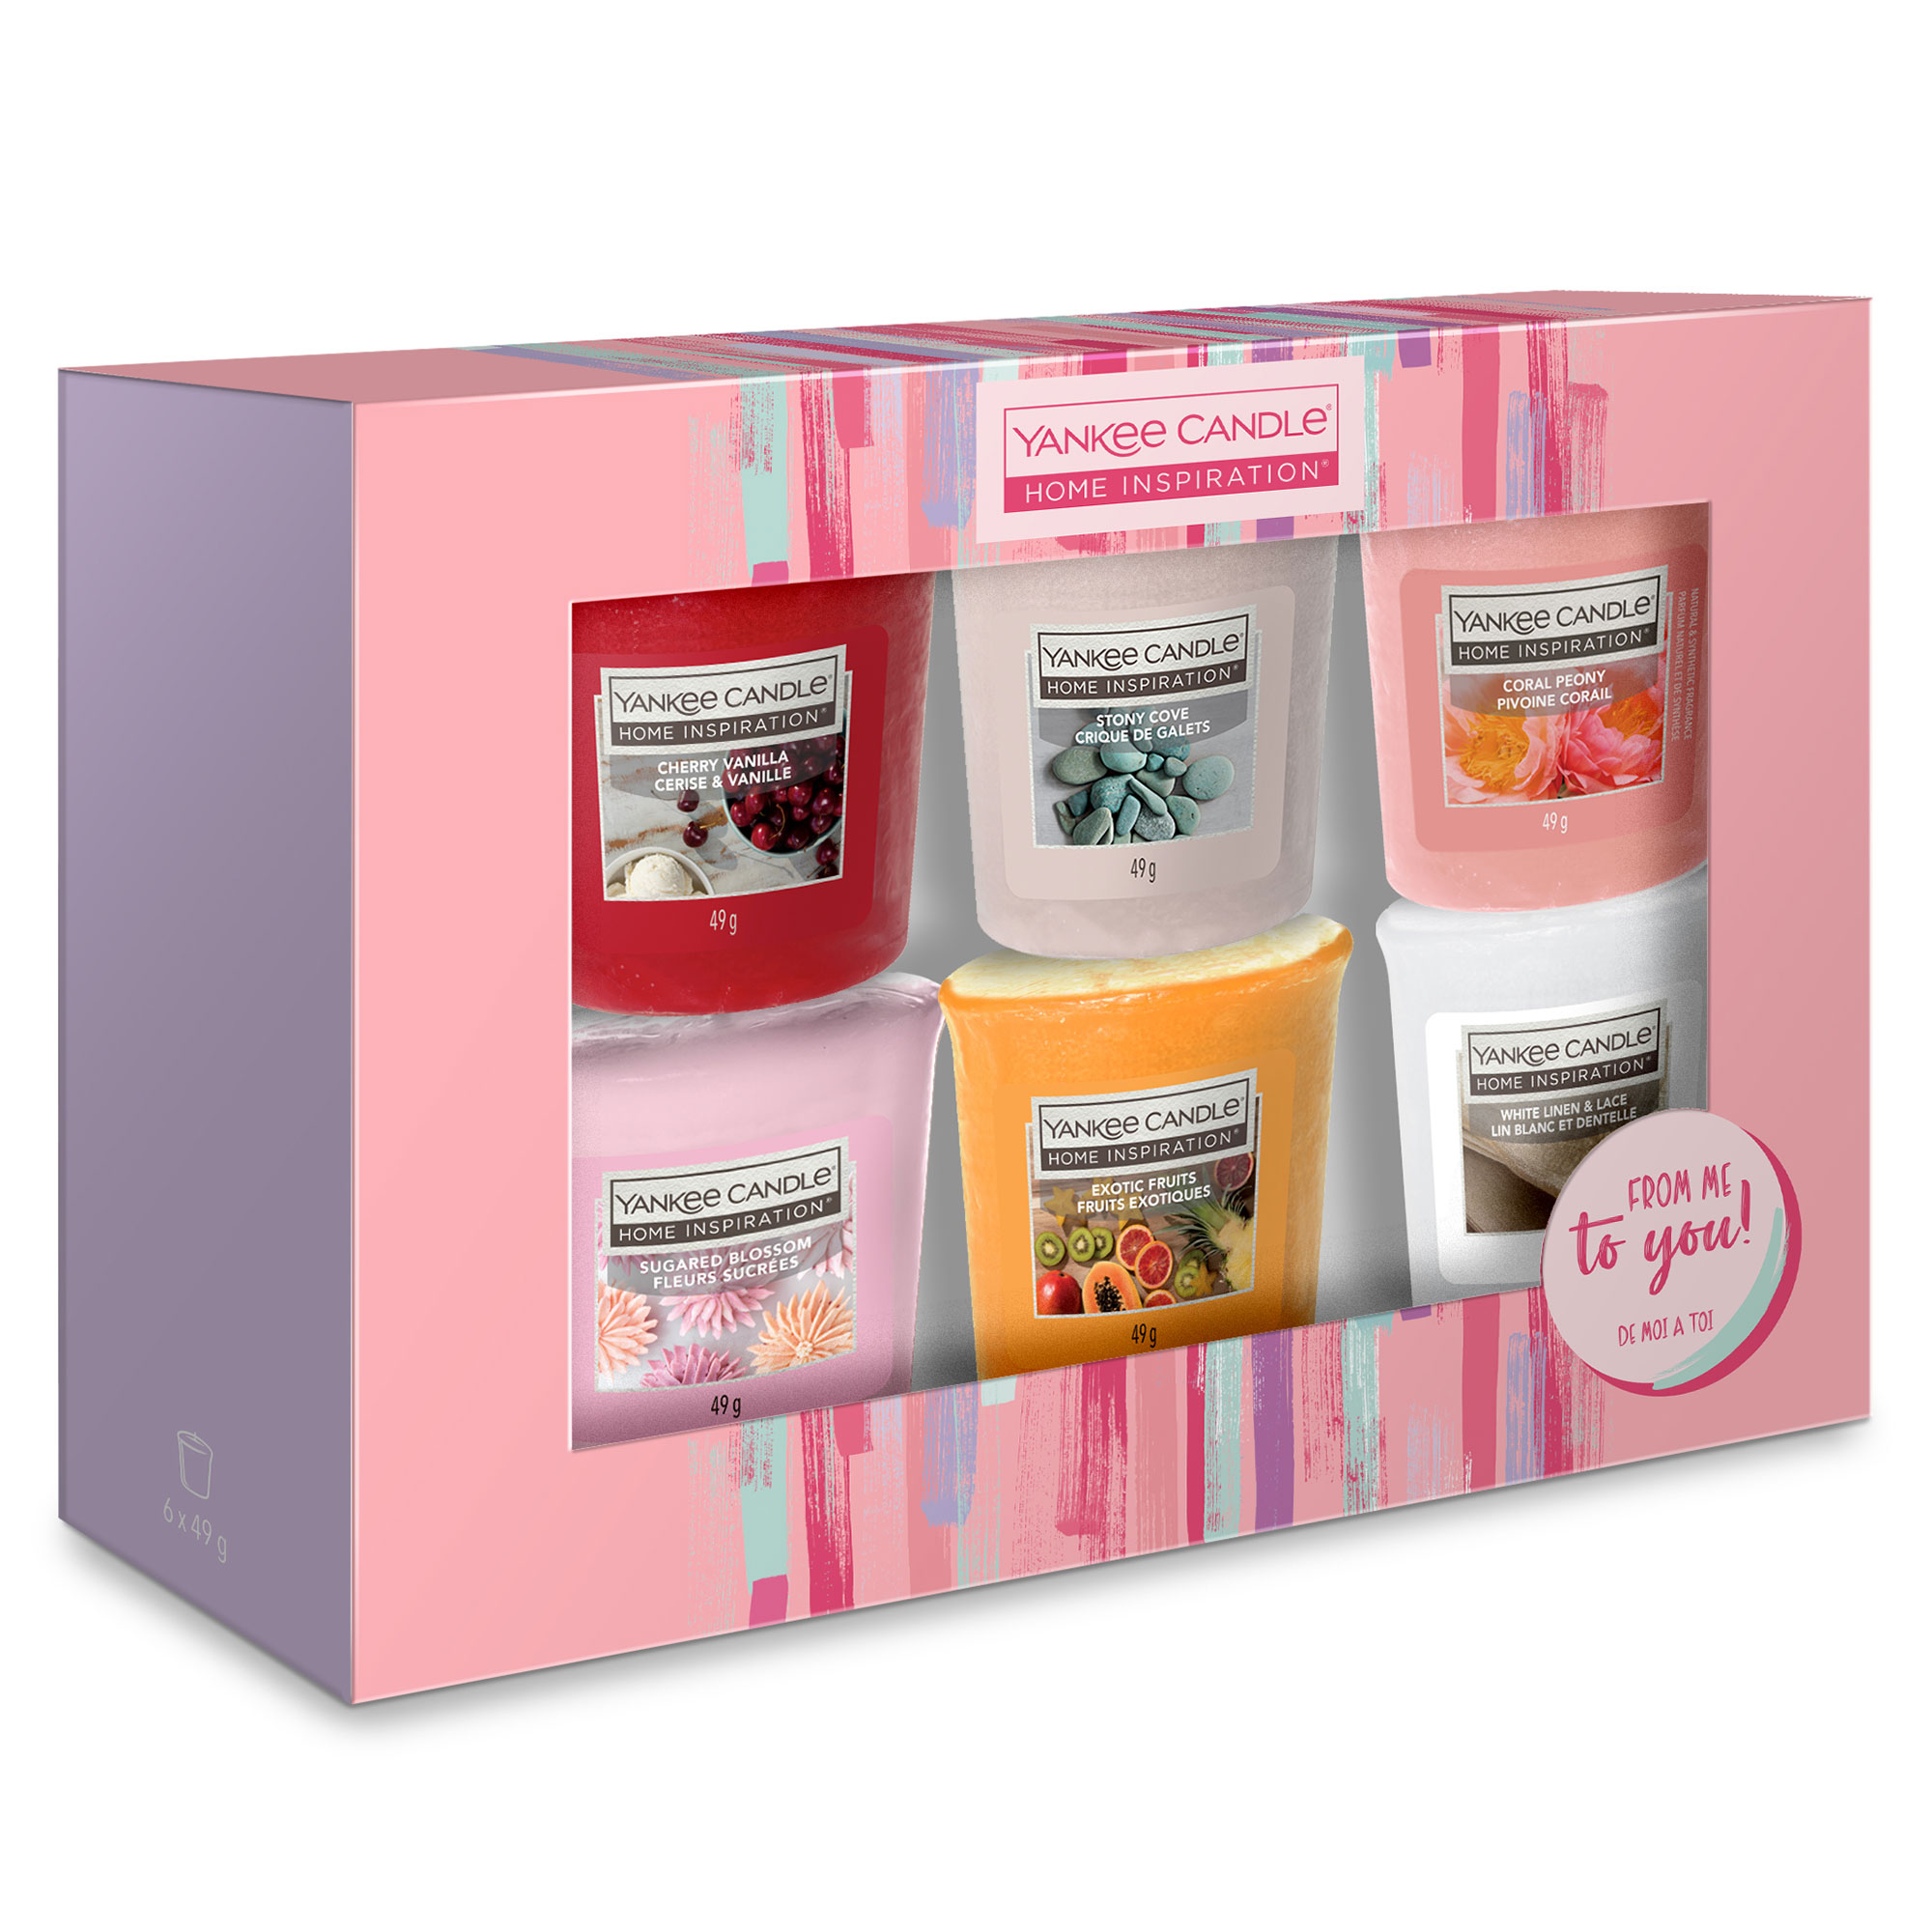 Yankee Candle Home Inspiration Votive Gift Set